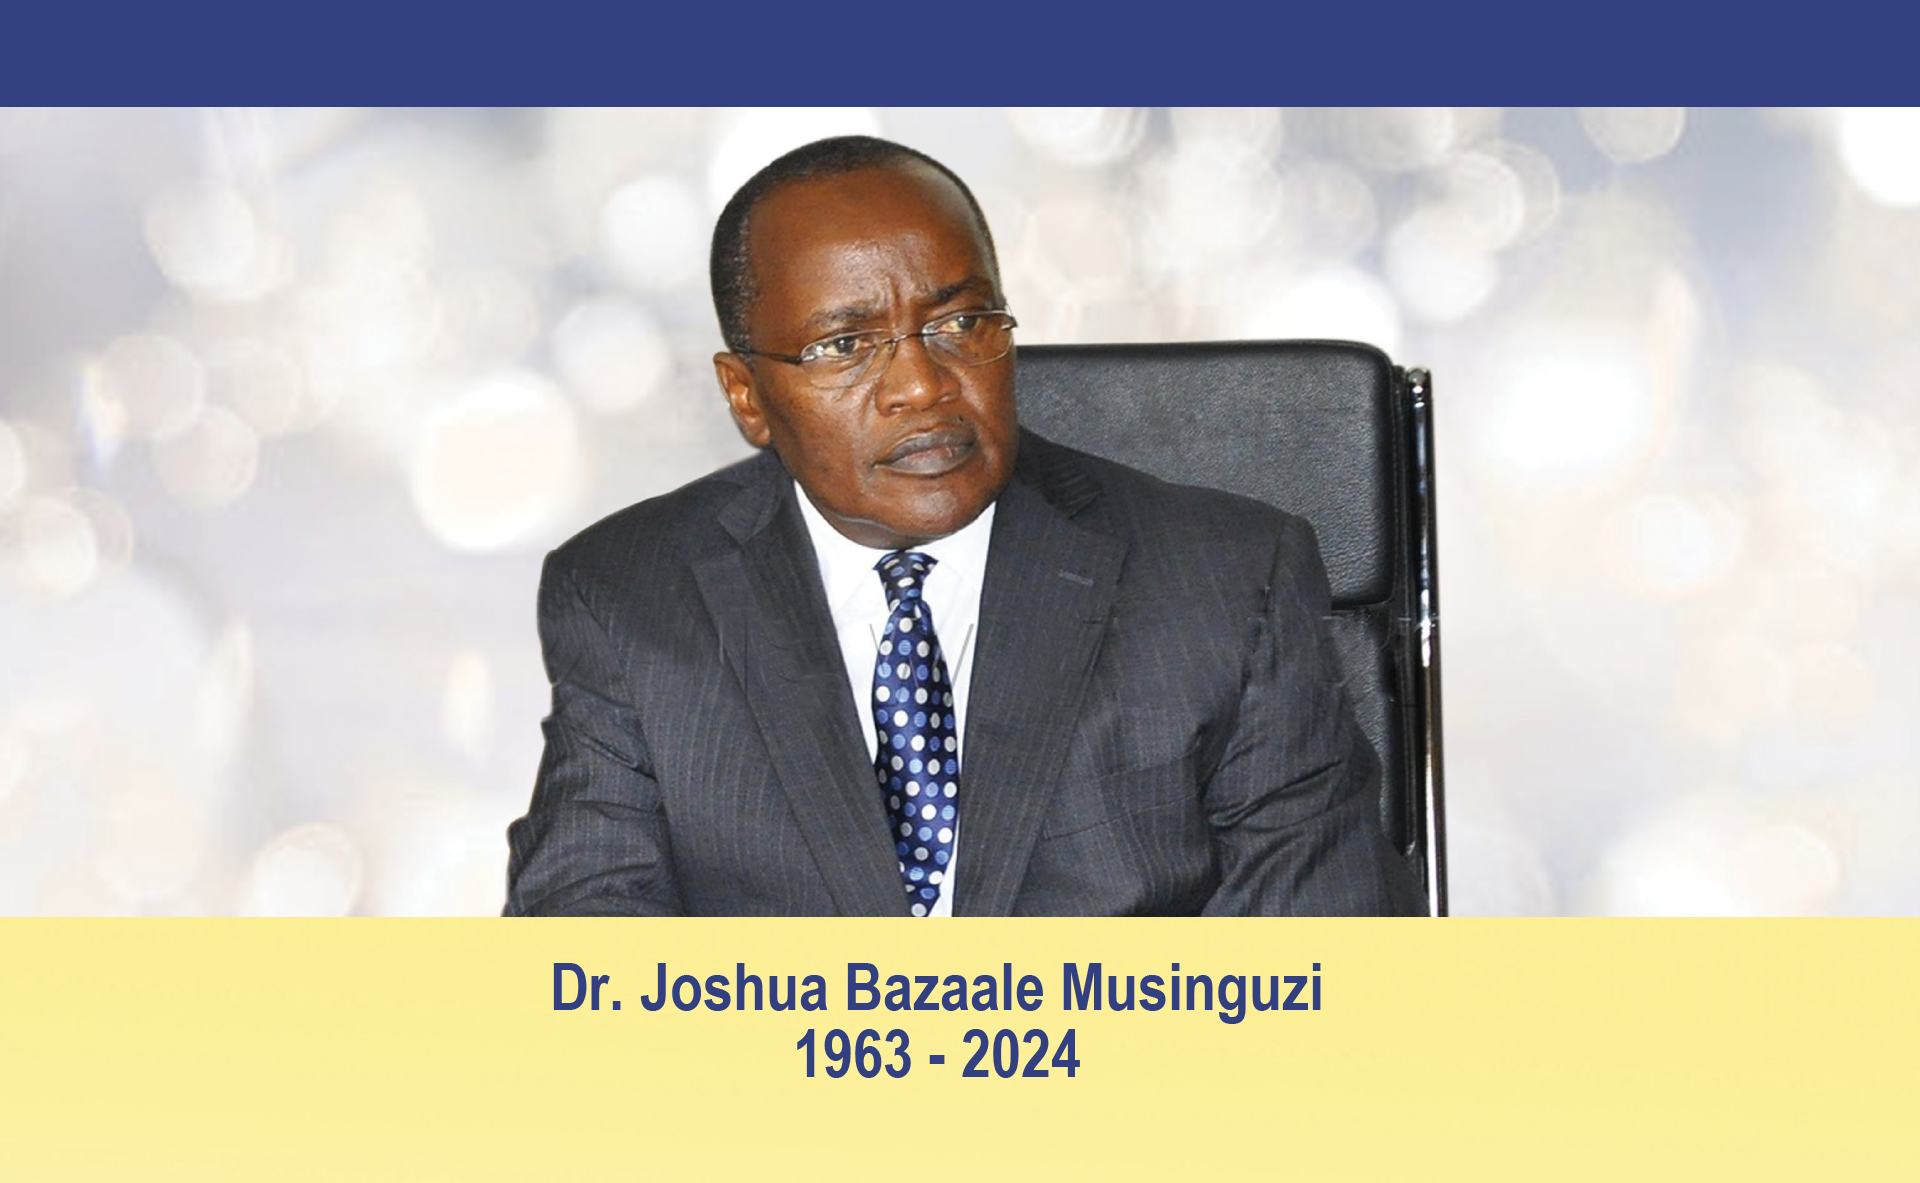 Dr. Musinguzi will be remembered for coordinating efforts to promote HIV Response in Uganda